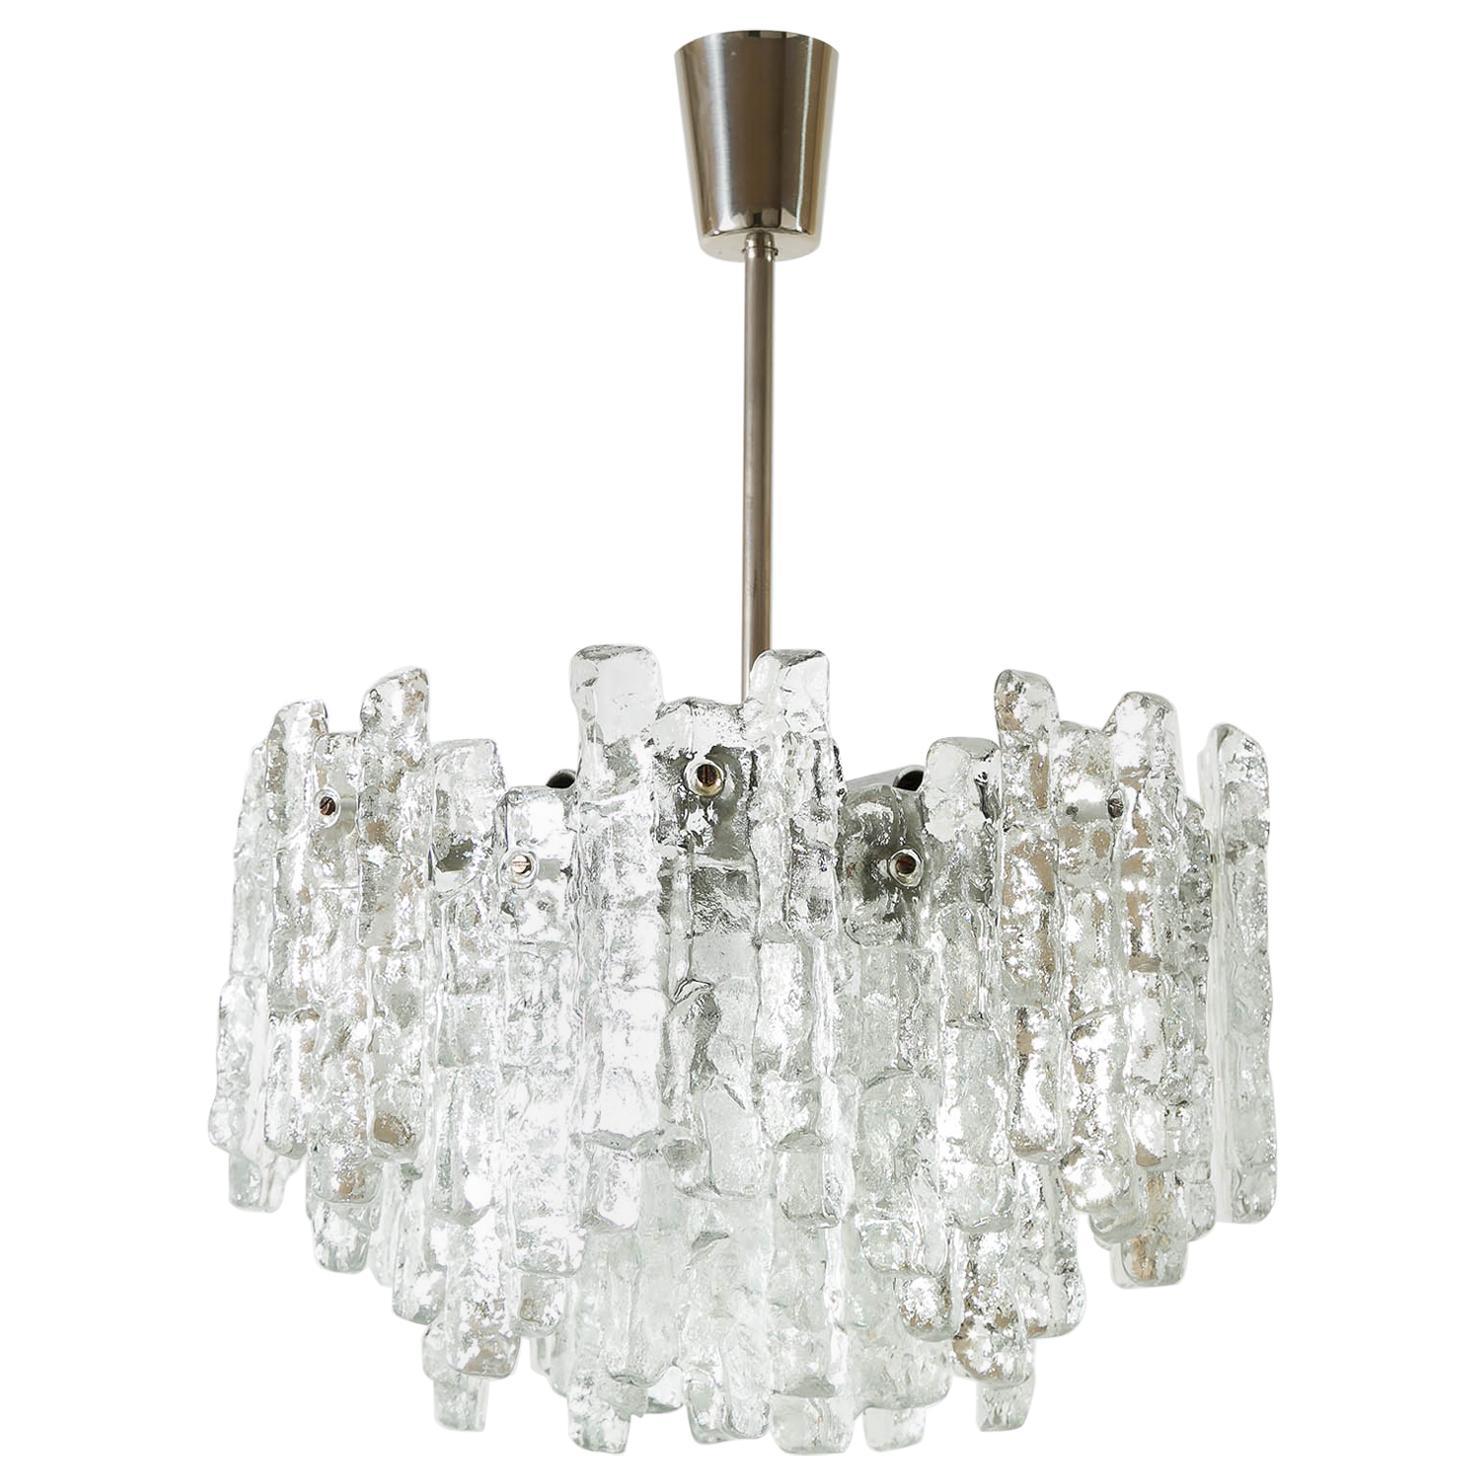 Mid-Century Modern One of Two Kalmar Ice Glass Chandeliers Light Fixtures, 1960s For Sale